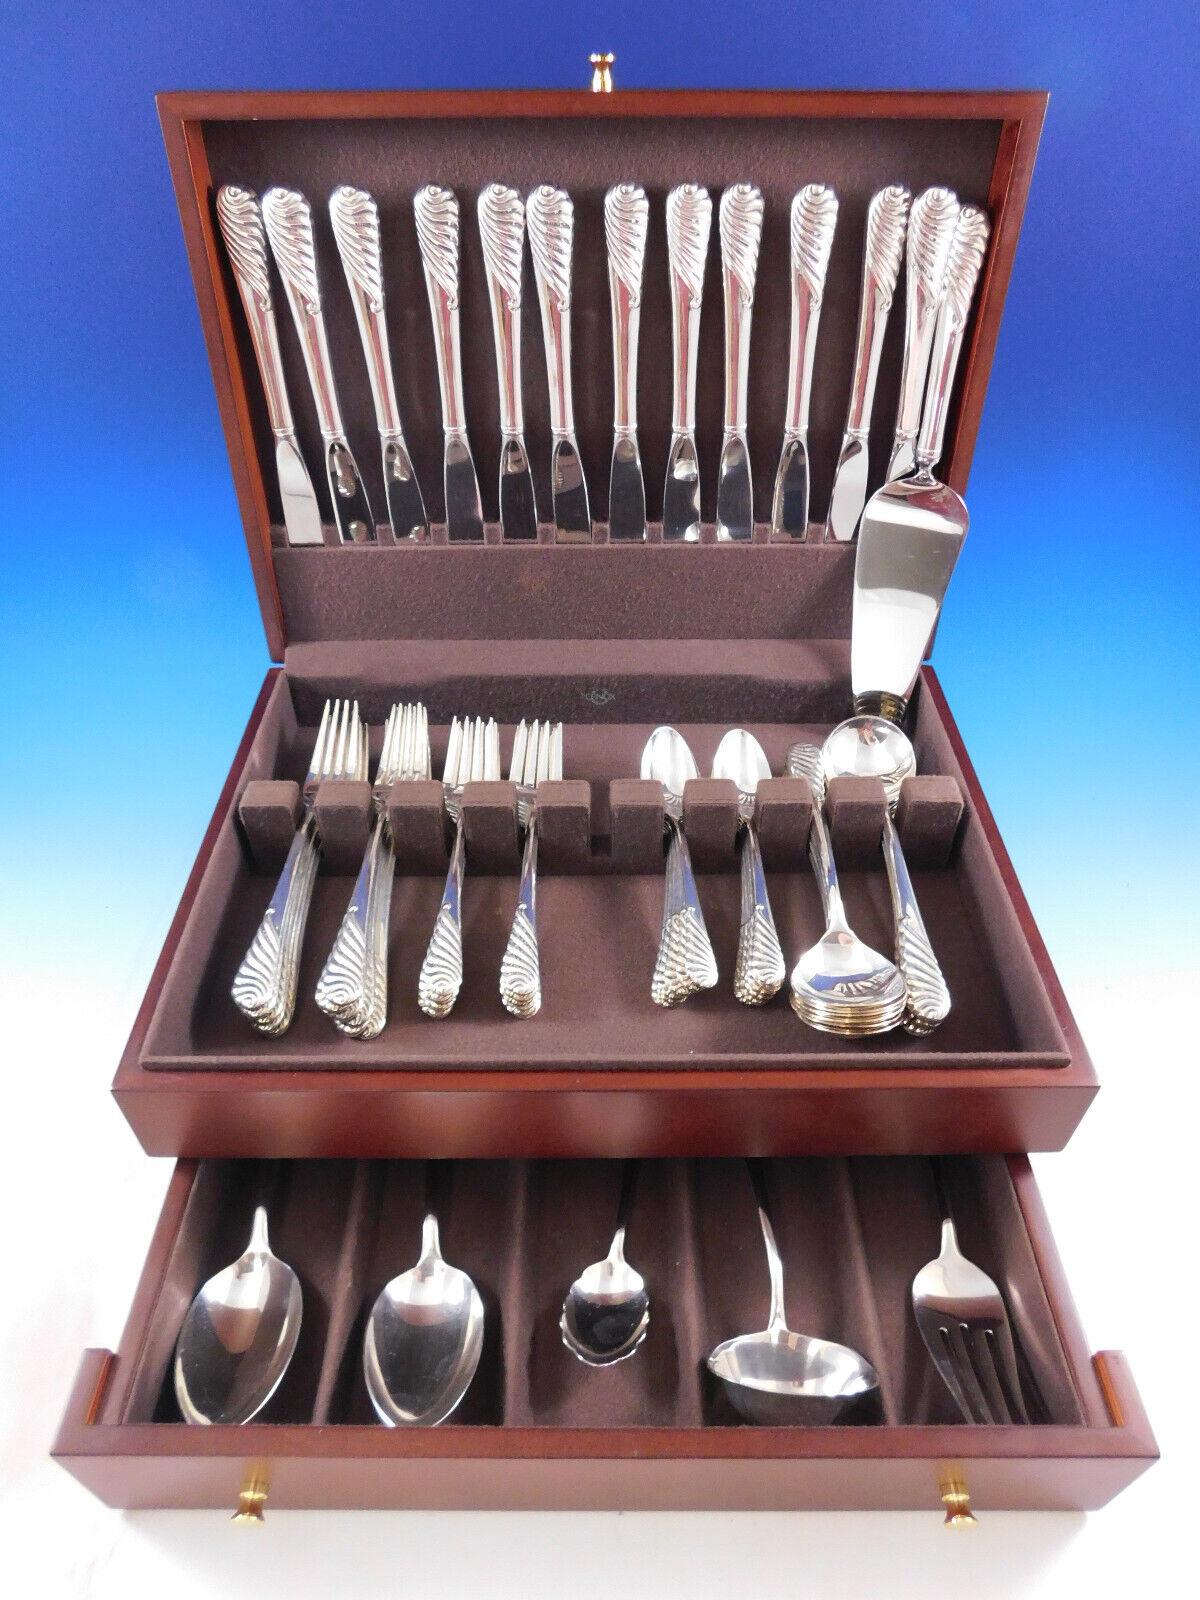 Sea Sculpture by Gorham sterling silver Flatware set - 66 pieces. This pattern would be perfect for a modern home. It has a wave-like design, reminiscent of the sea. This set includes:

12 Knives, 9